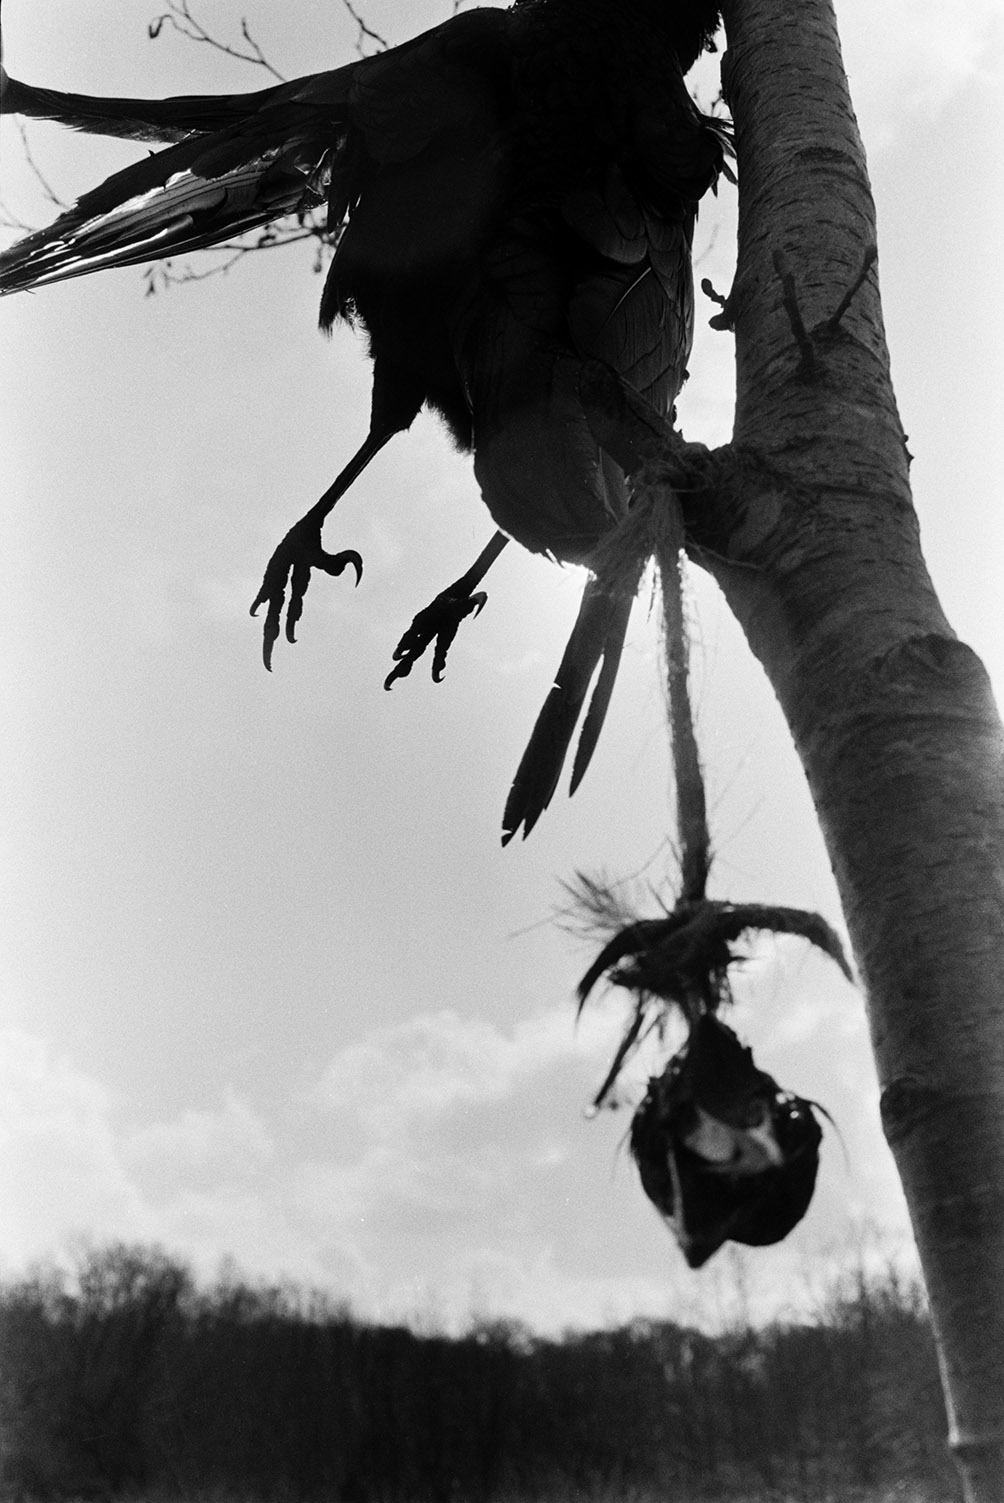 Dead jackdaws hung in a tree, to scare off other birds, at North Devon Clay Pit, Meeth.